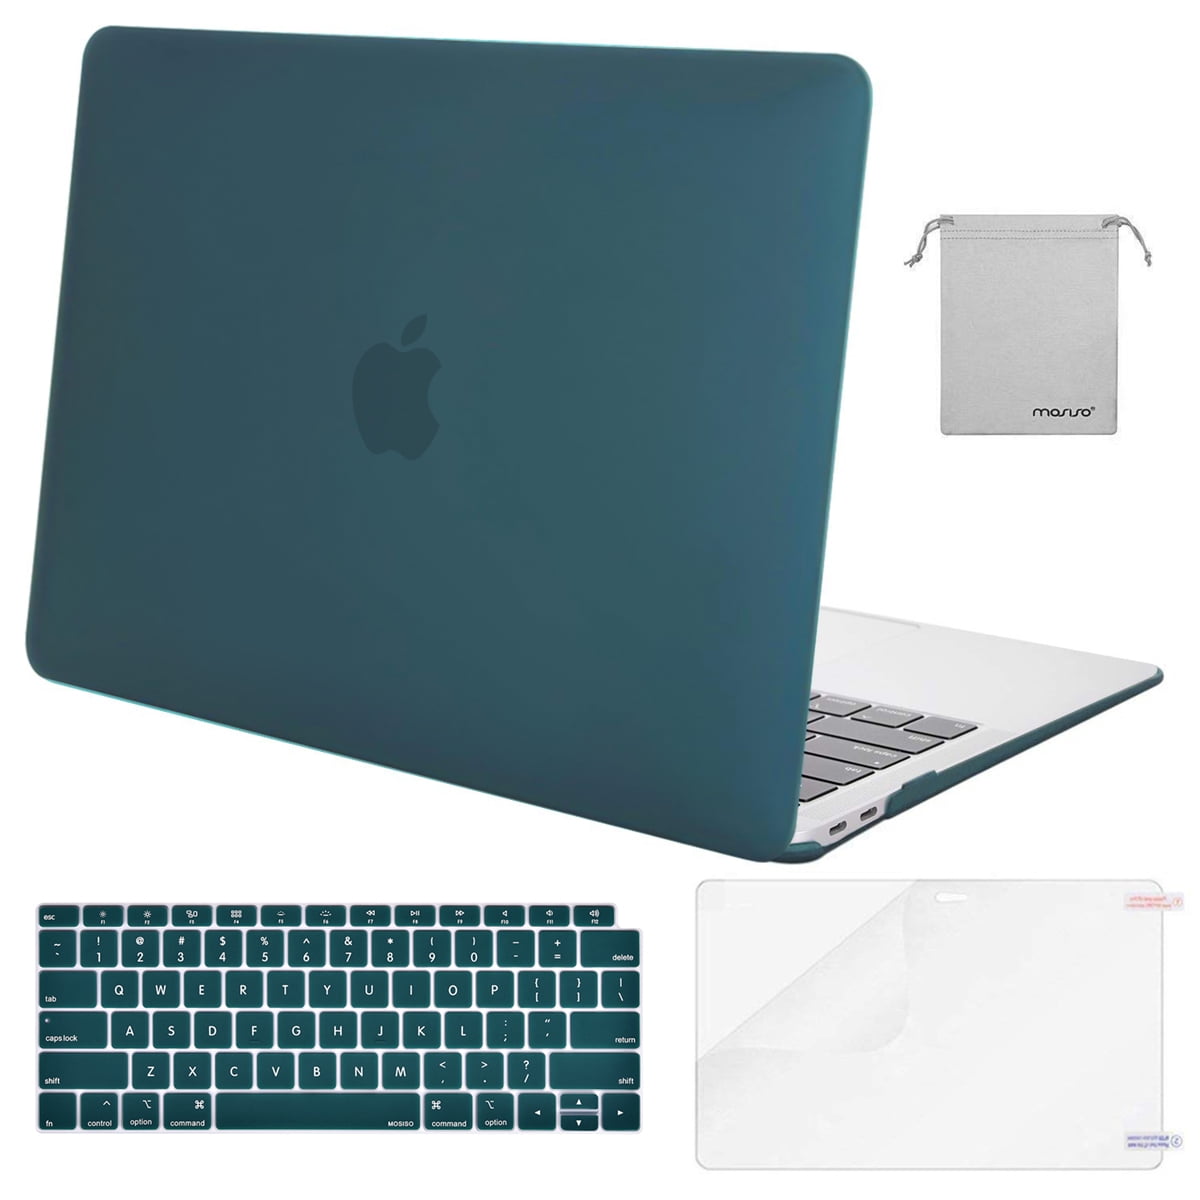 MOSISO MacBook Air 13 inch Case 2019/2018 Release A1932 with Retina Display Deep Teal Plastic Hard Shell & Keyboard Cover & Screen Protector & Storage Bag Compatible Newly MacBook Air 13